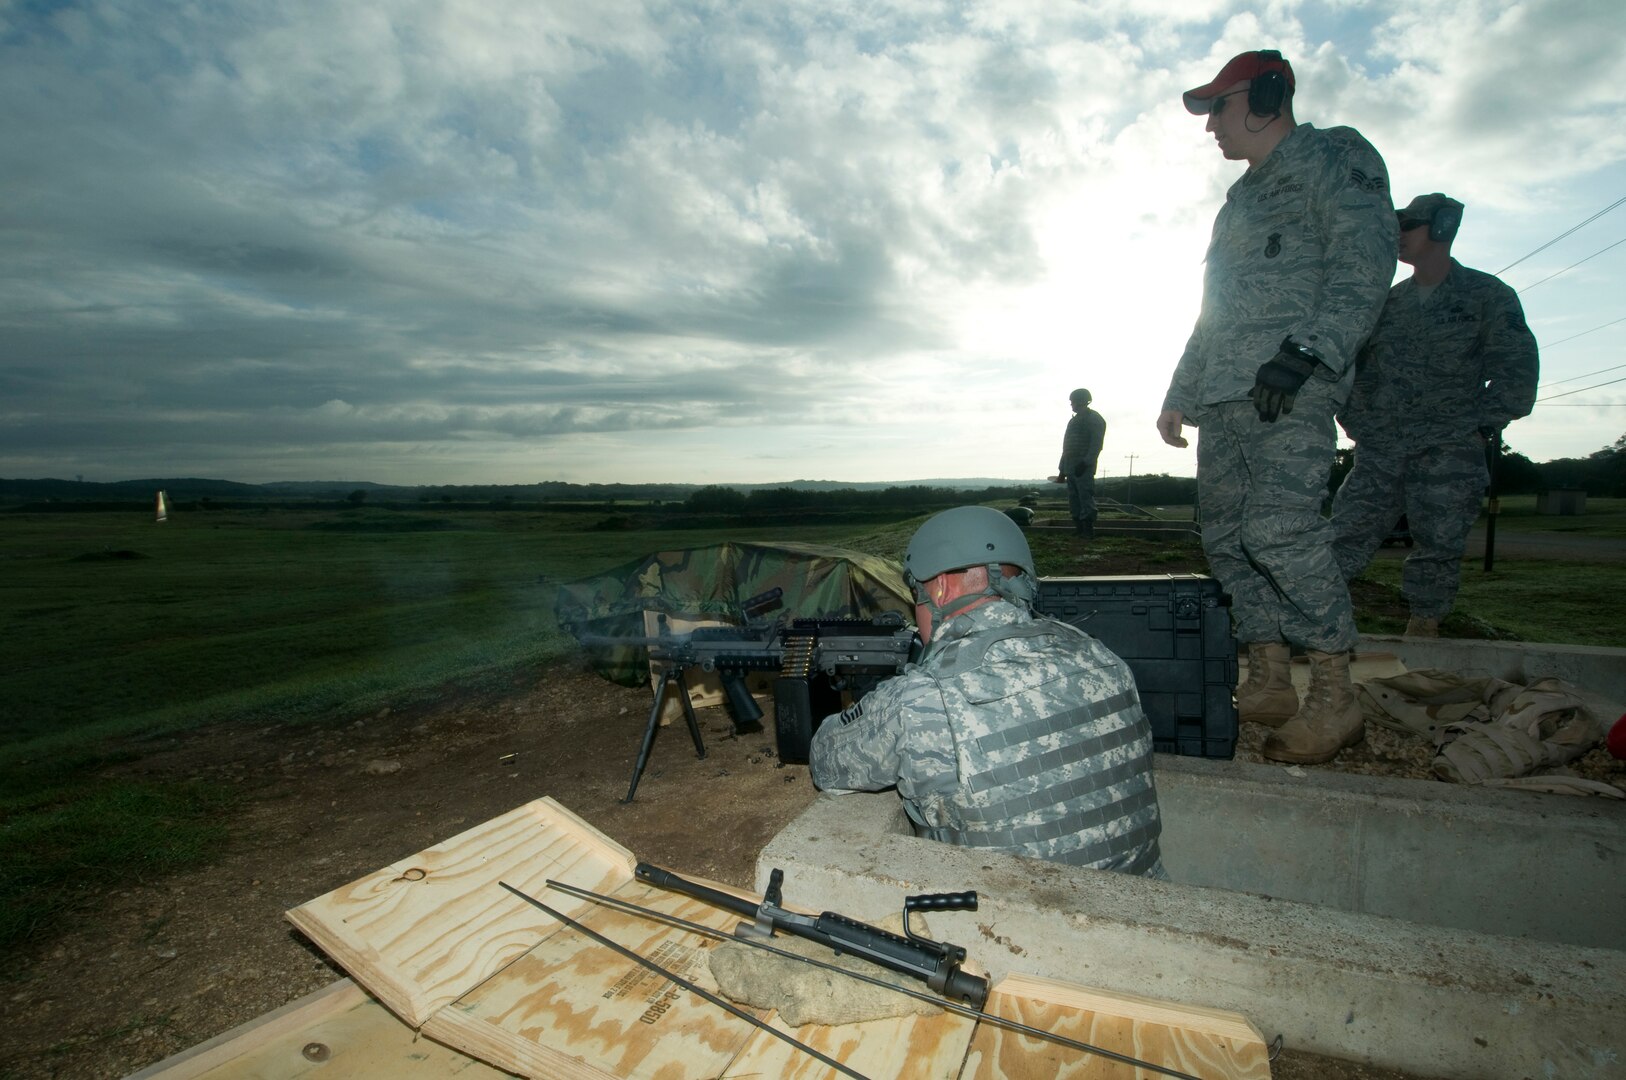 Getting an early start, airman assigned to the 902 ABW/SFS start heavy weapons qualification firing at Camp Bullis, TX 21 September 2010. (U.S. Air Force photo/Steve White)